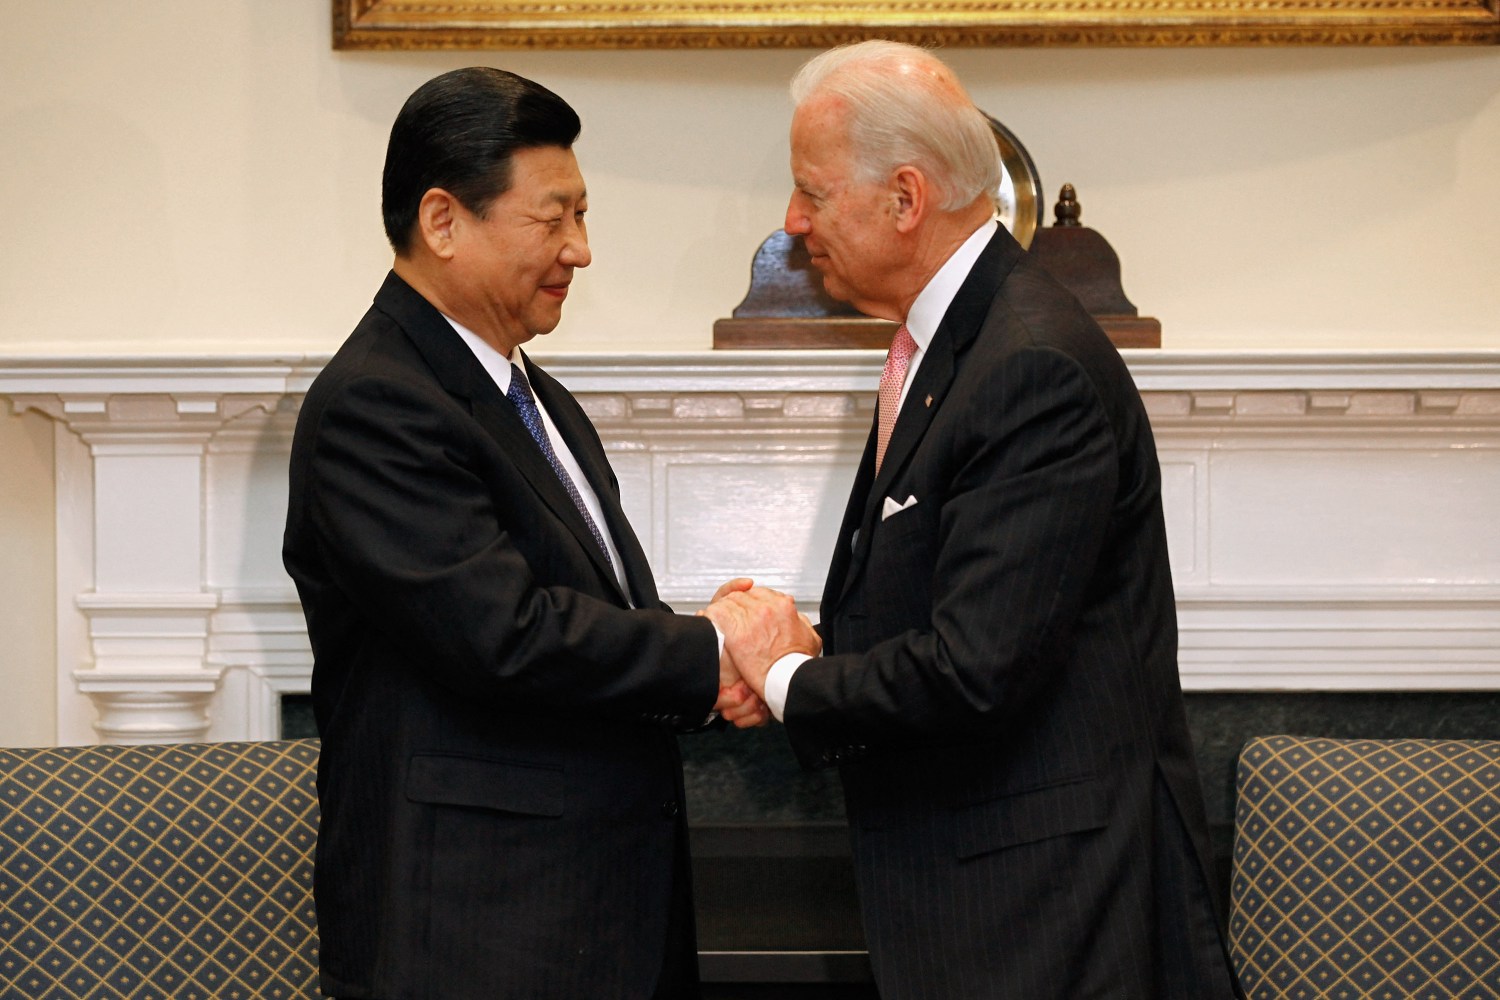 File photo dated February 14, 2012 of U.S. Vice President Joe Biden and Chinese Vice President Xi Jinping hold an expanded bilateral meeting in the Roosevelt Room at the White House in Washington, DC, USA. China will pay a price for its human rights abuses, U.S. President Joe Biden warned on Tuesday, responding to queries at a televised event on the Asian nations handling of Muslim minorities in its far western region of Xinjiang. Chinese President Xi Jinping has drawn global criticism for holding the minority Uighurs in internment camps and other human rights abuses. Photo by Chip Somodevilla/Pool/ABACAPRESS.COM